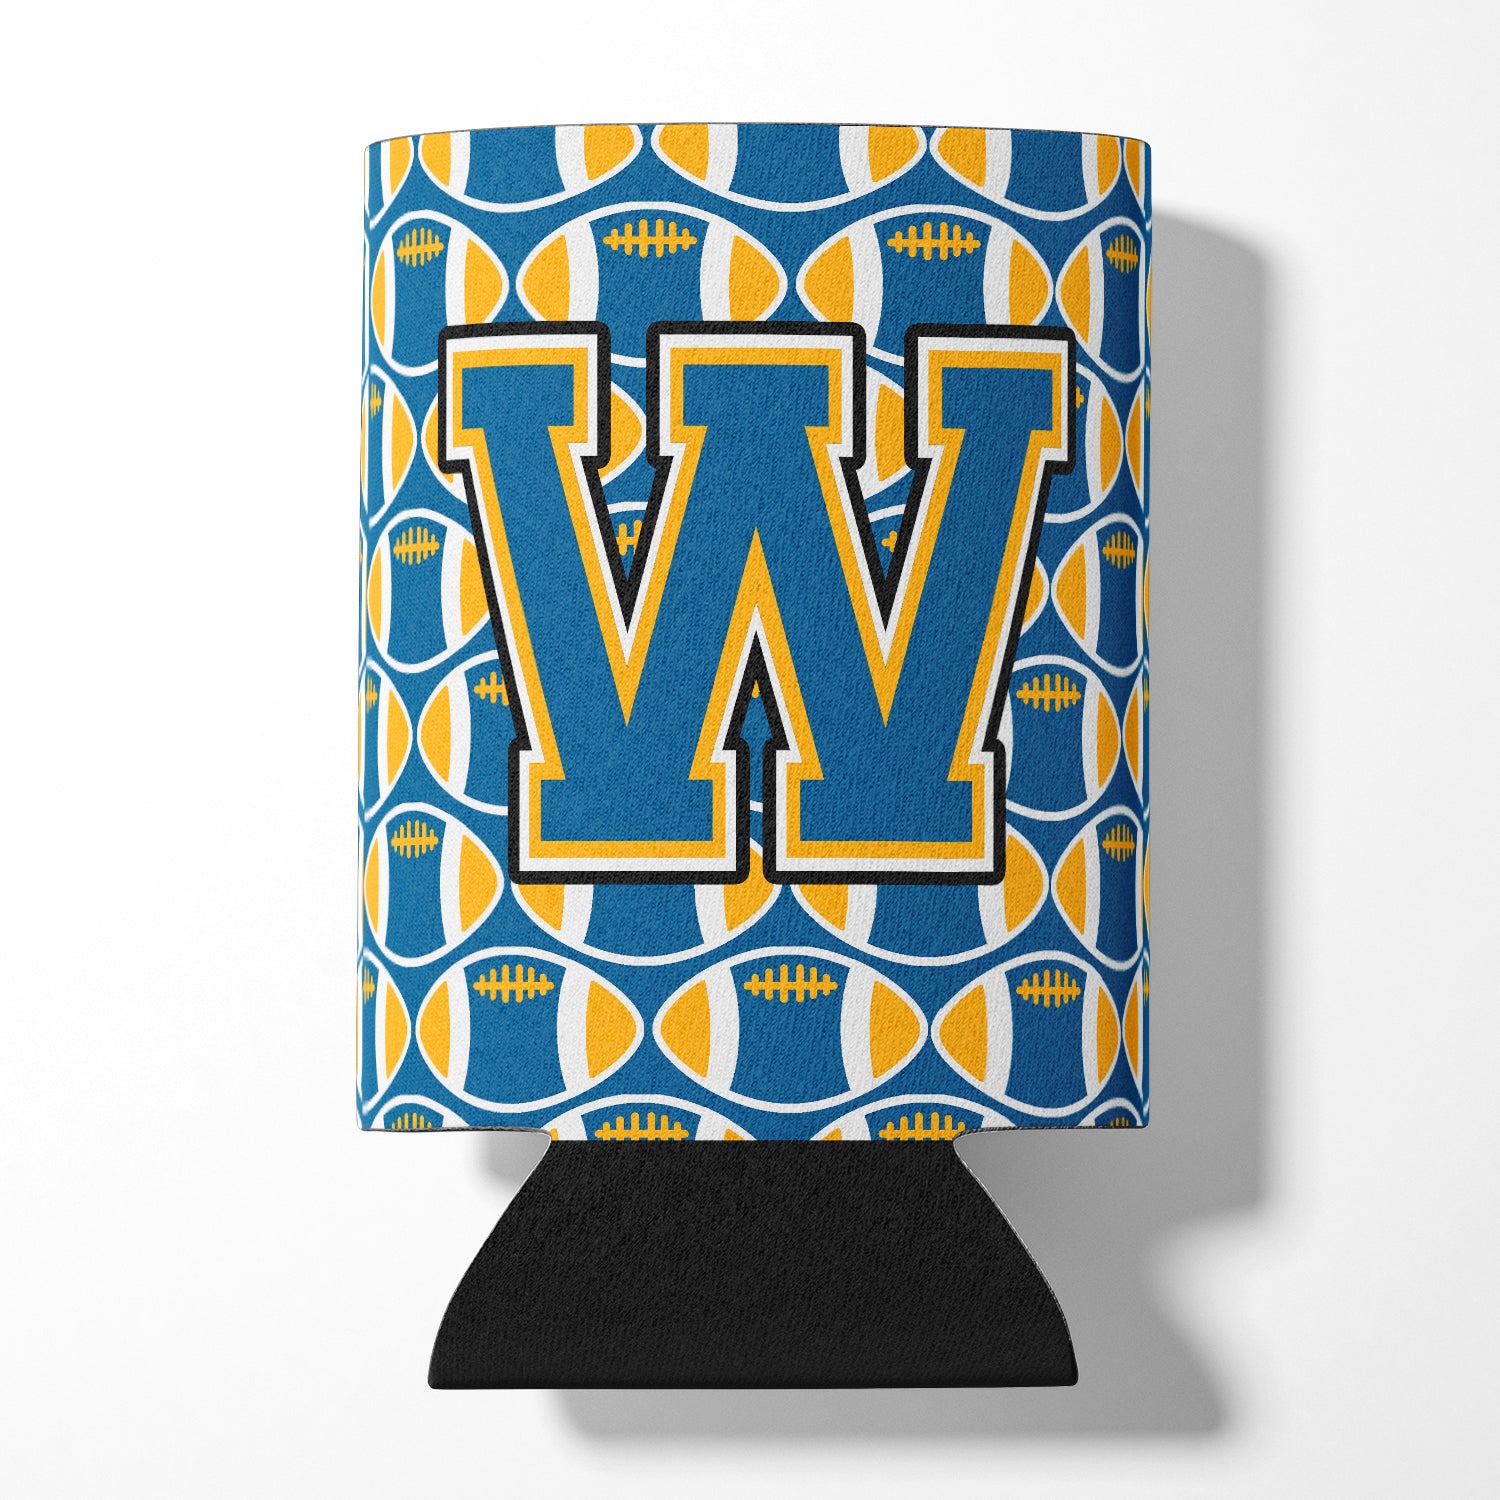 Letter W Football Blue and Gold Can or Bottle Hugger CJ1077-WCC.